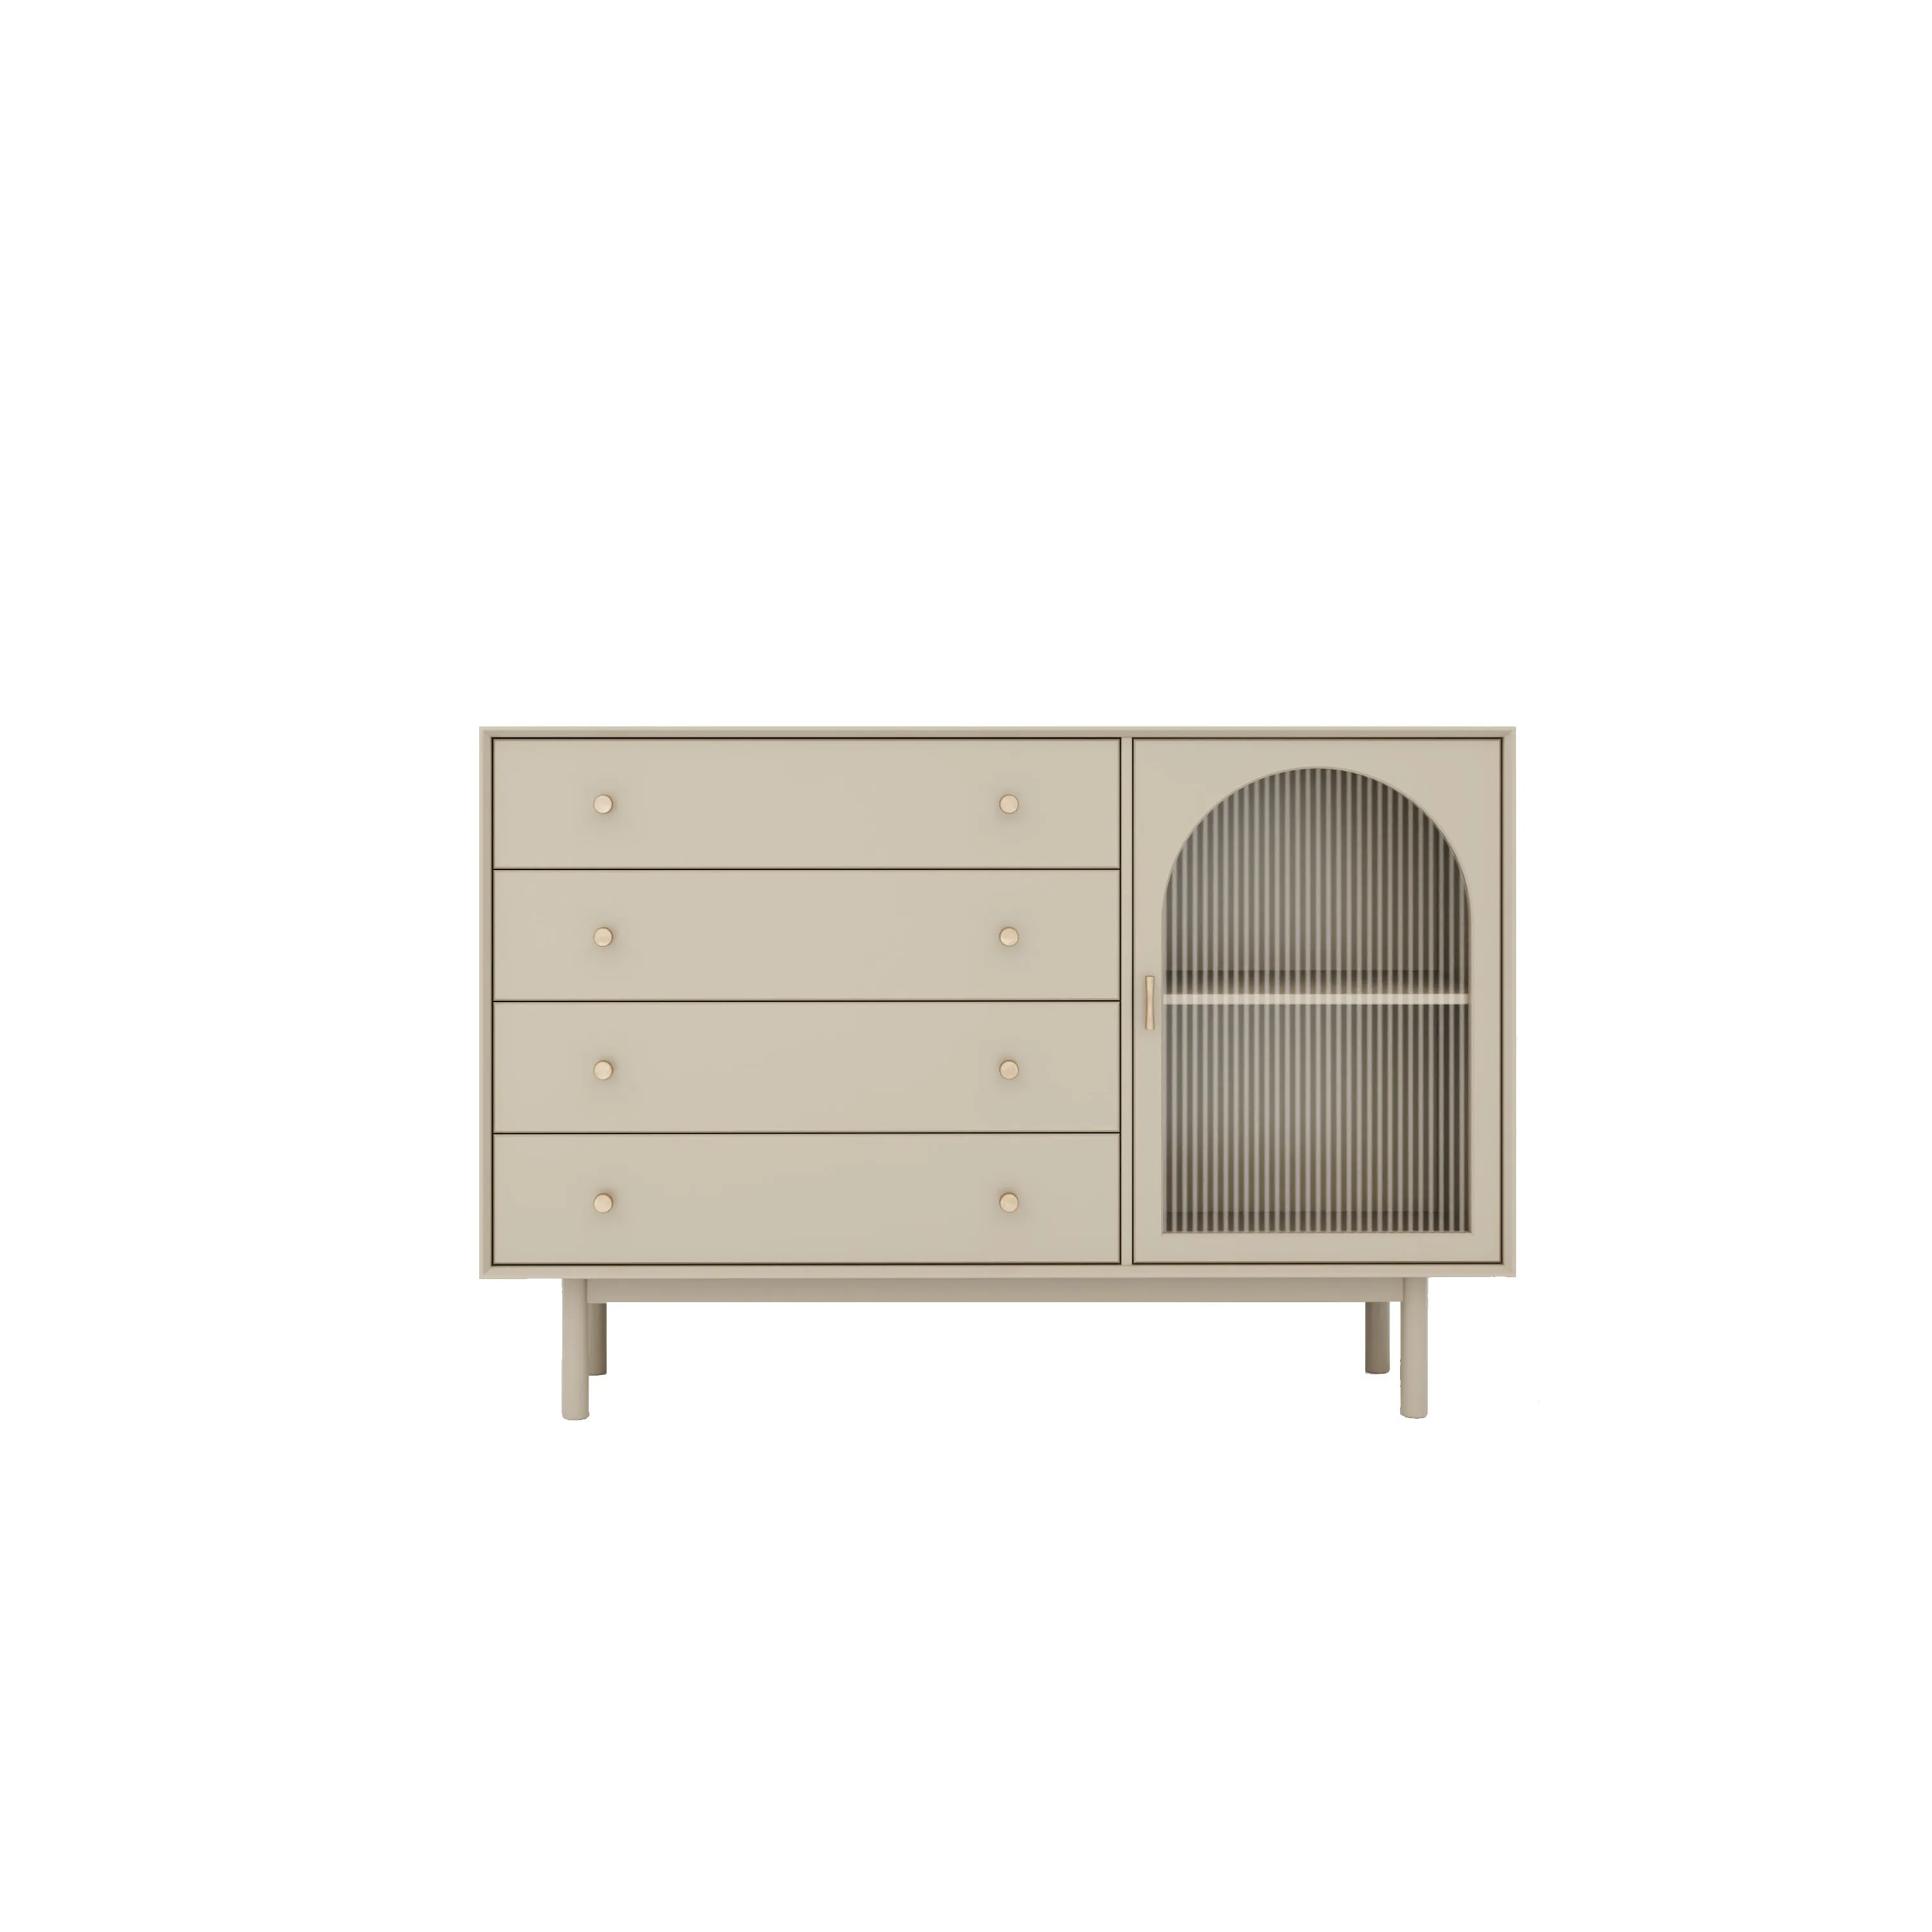 Nordic Style Bucket Cabinet Nordic Modern Living Room Bedroom Side Cabinet Wall Storage Cabinet Chest Of Drawers